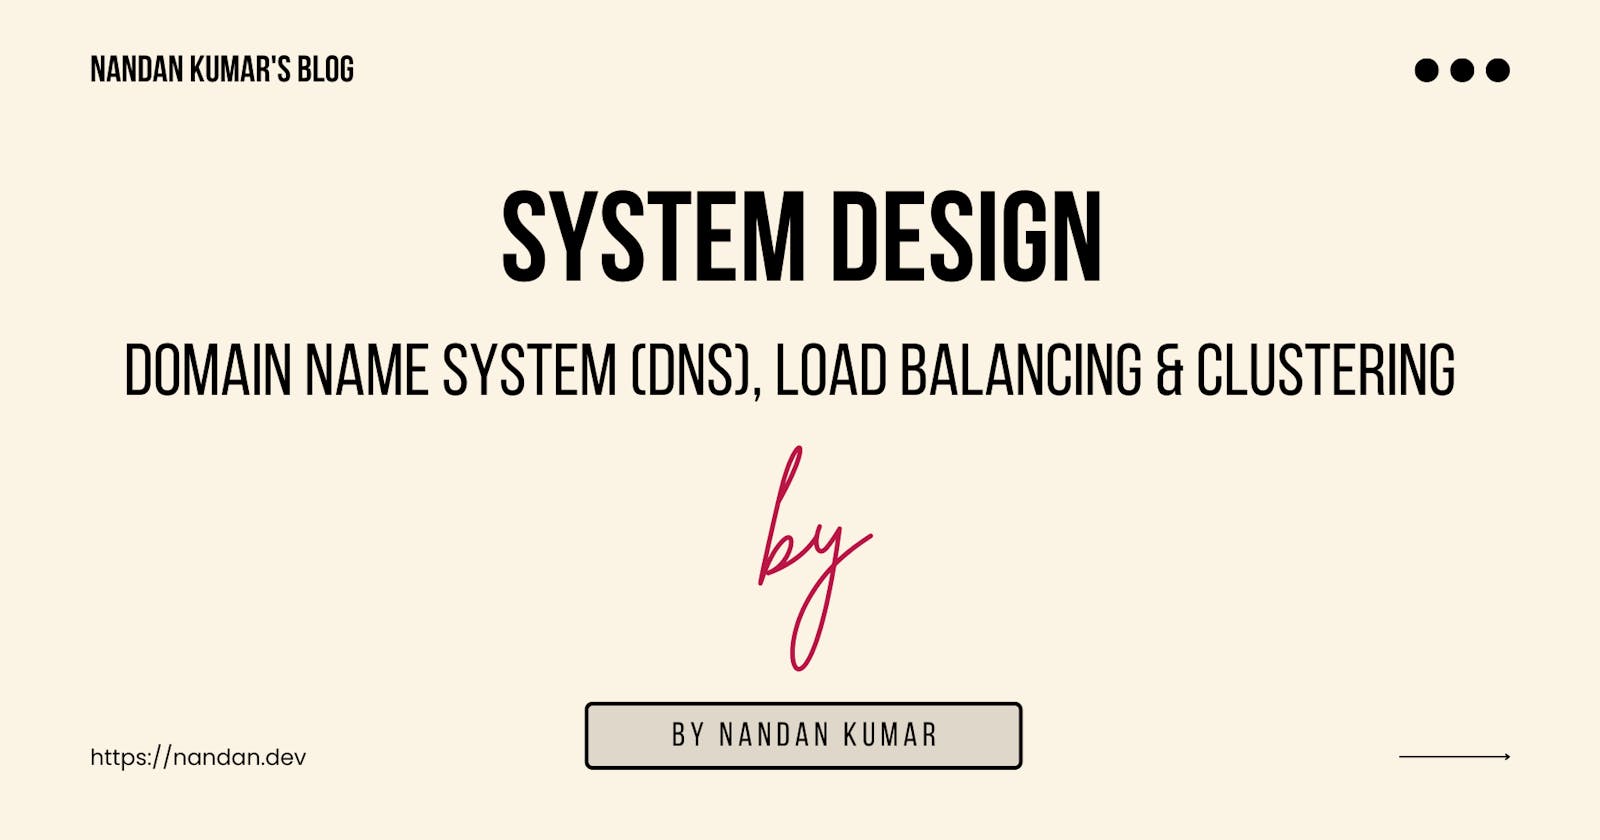 System Design: Domain Name System (DNS), Load Balancing & Clustering.